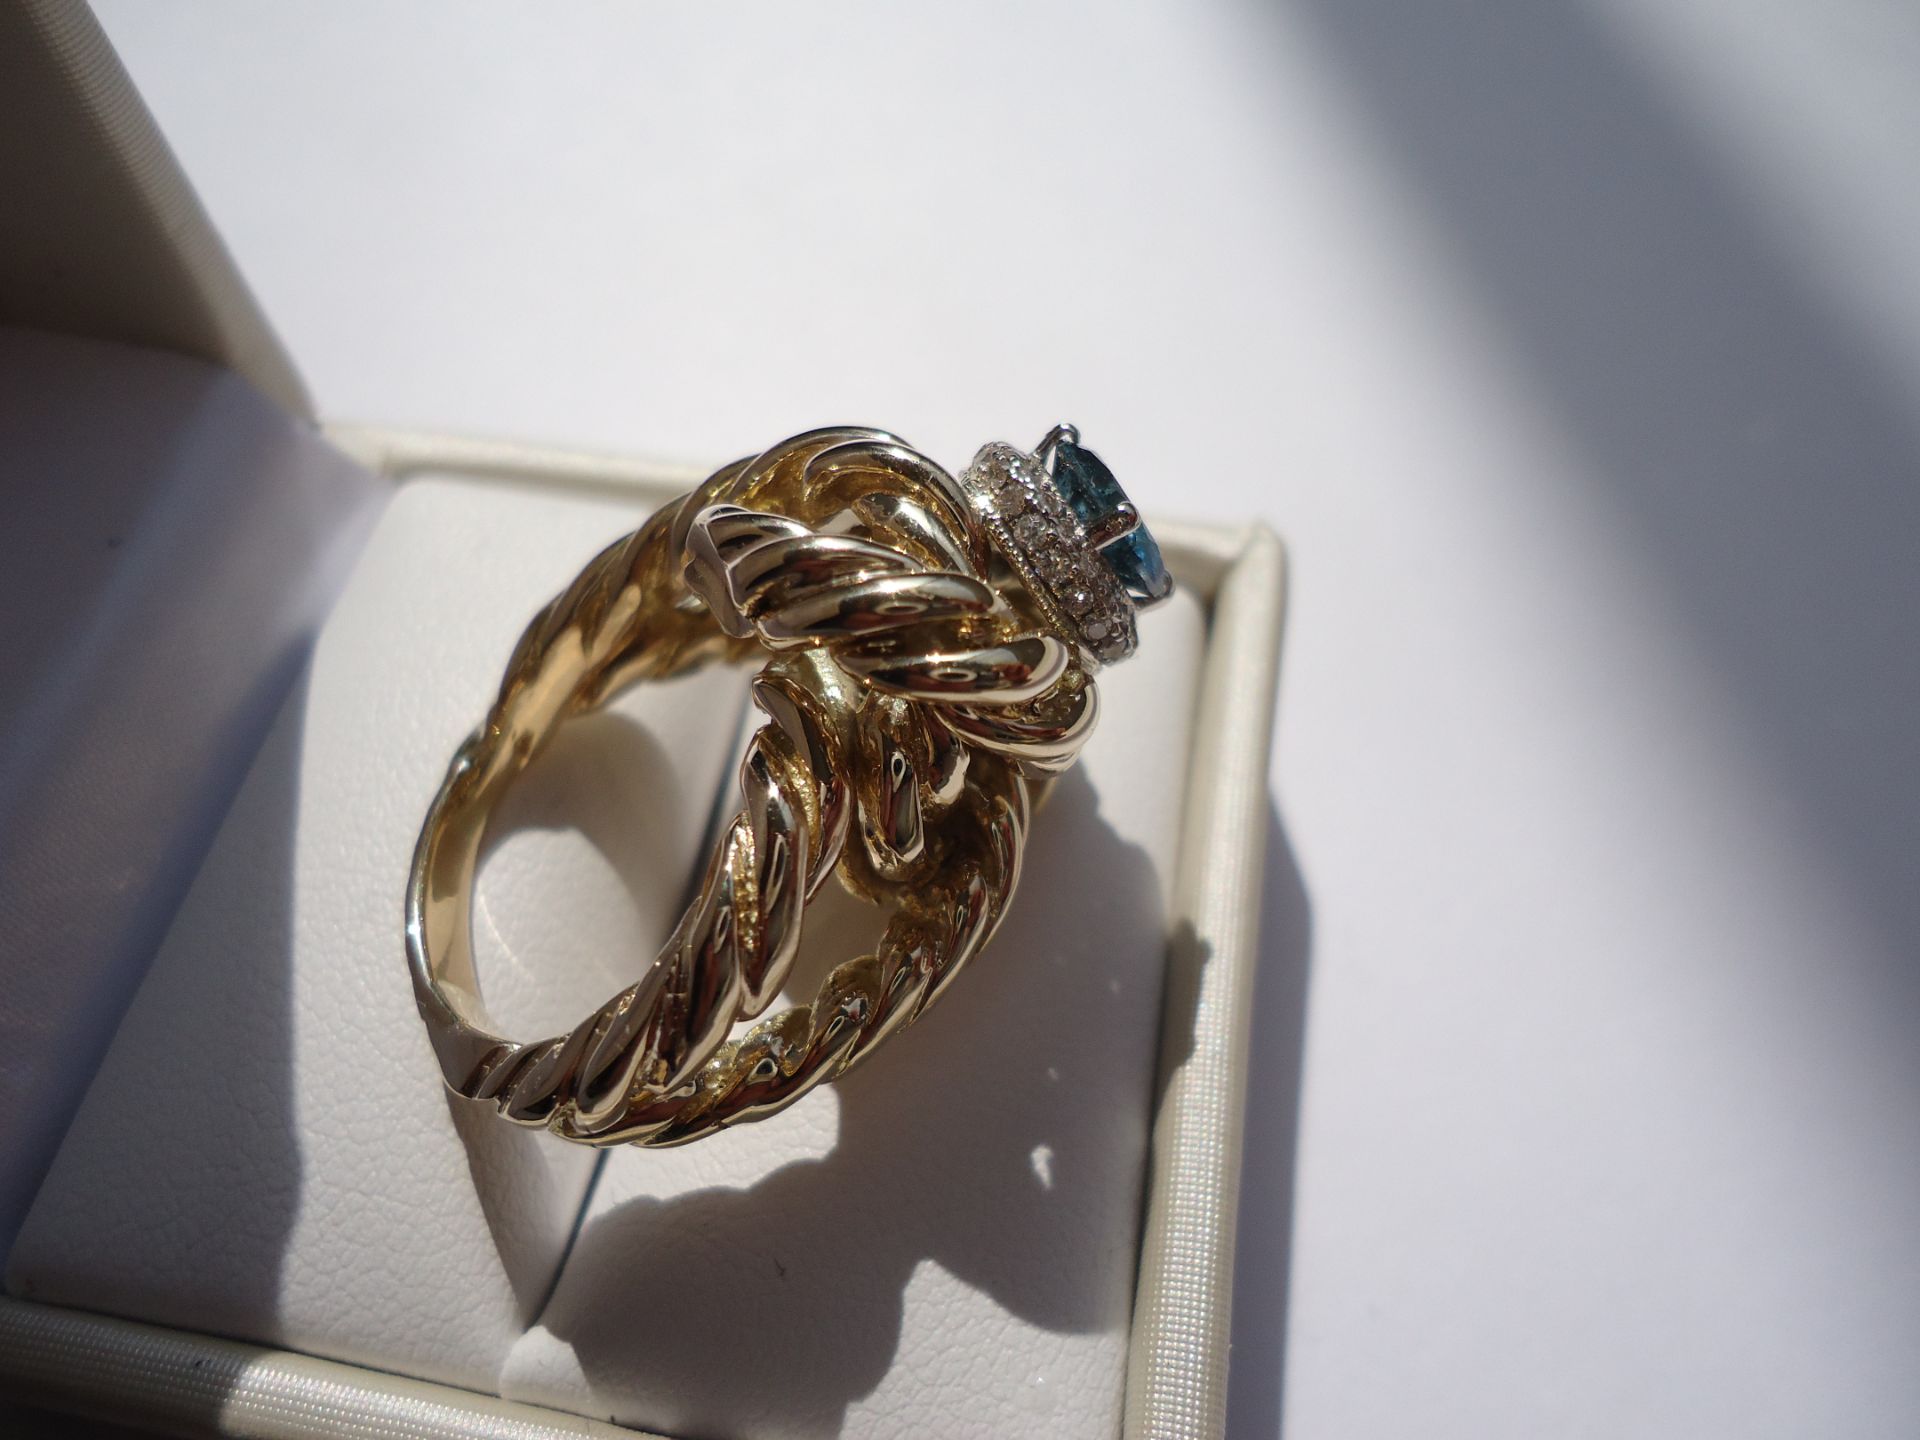 Classic Italian Knot Ring - Image 6 of 15